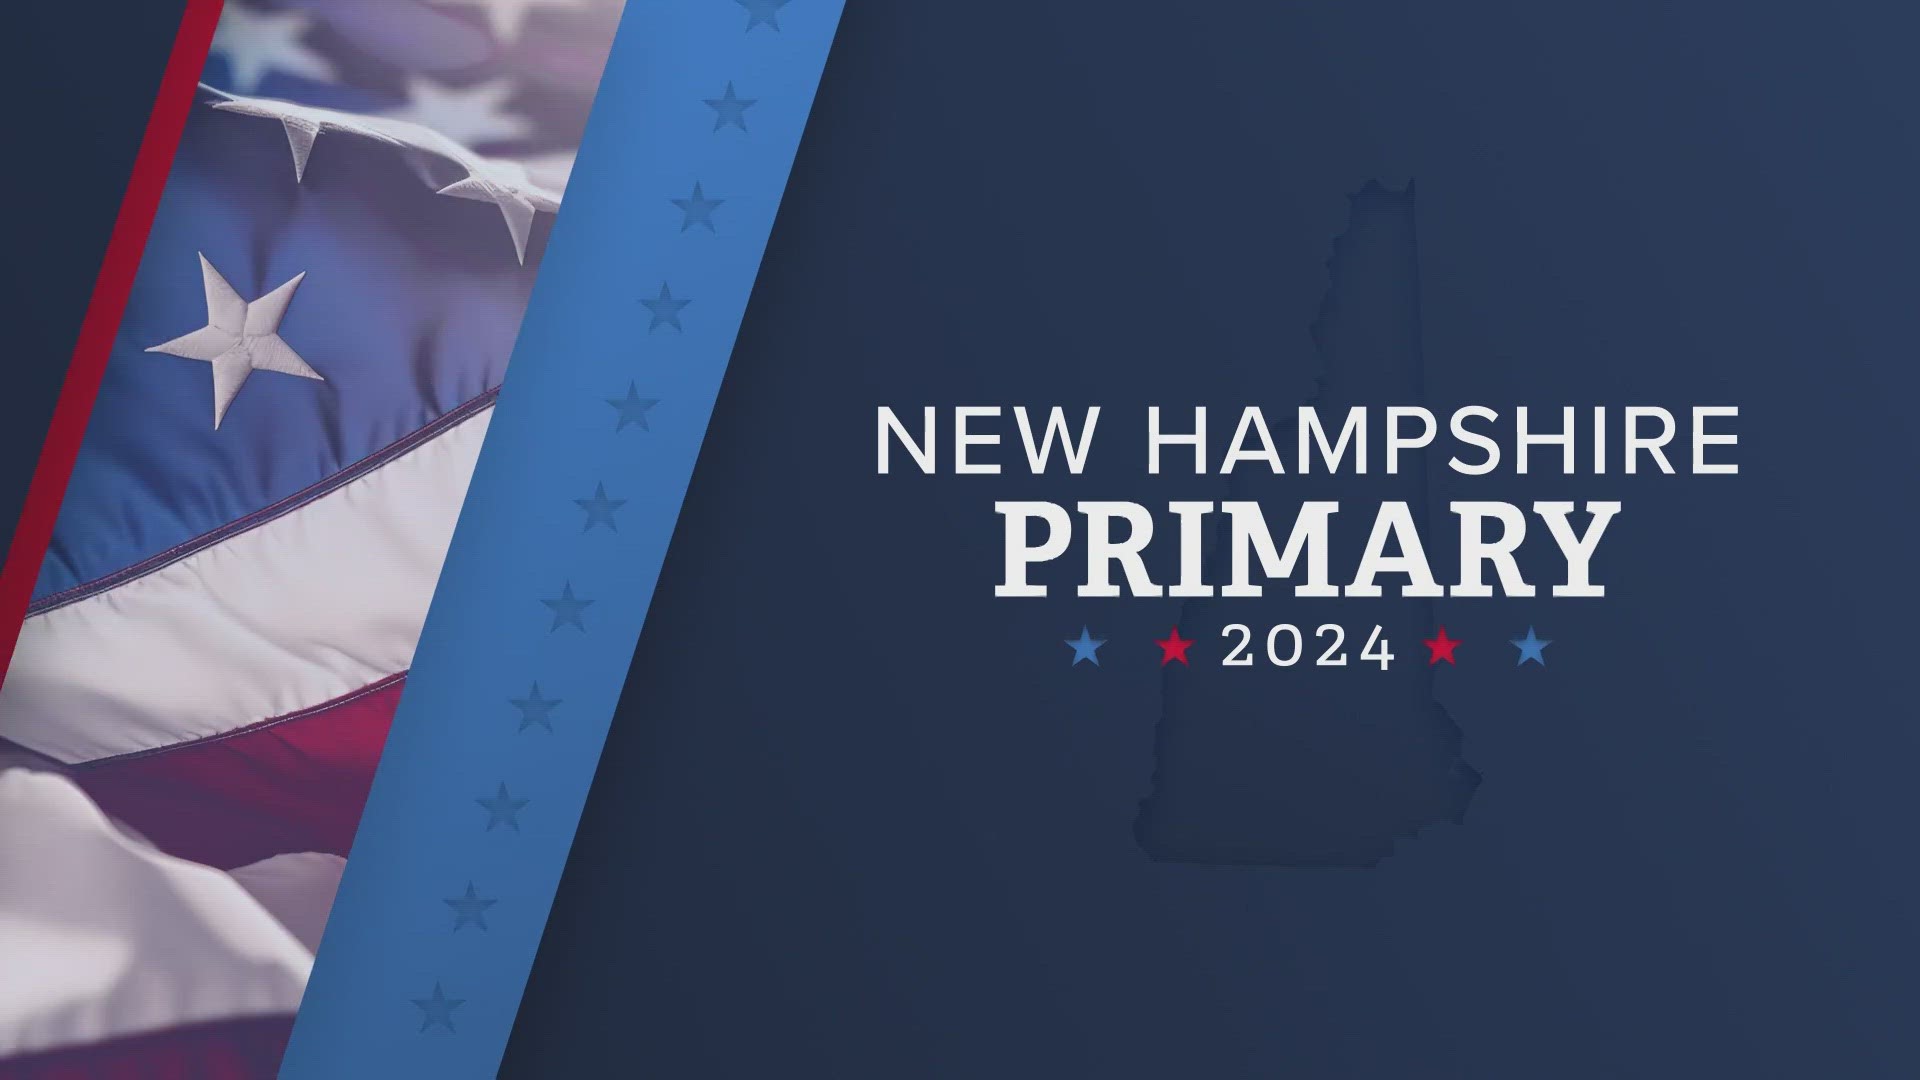 The primary at the Granite State is a tradition, but this year has been anything but ordinary.